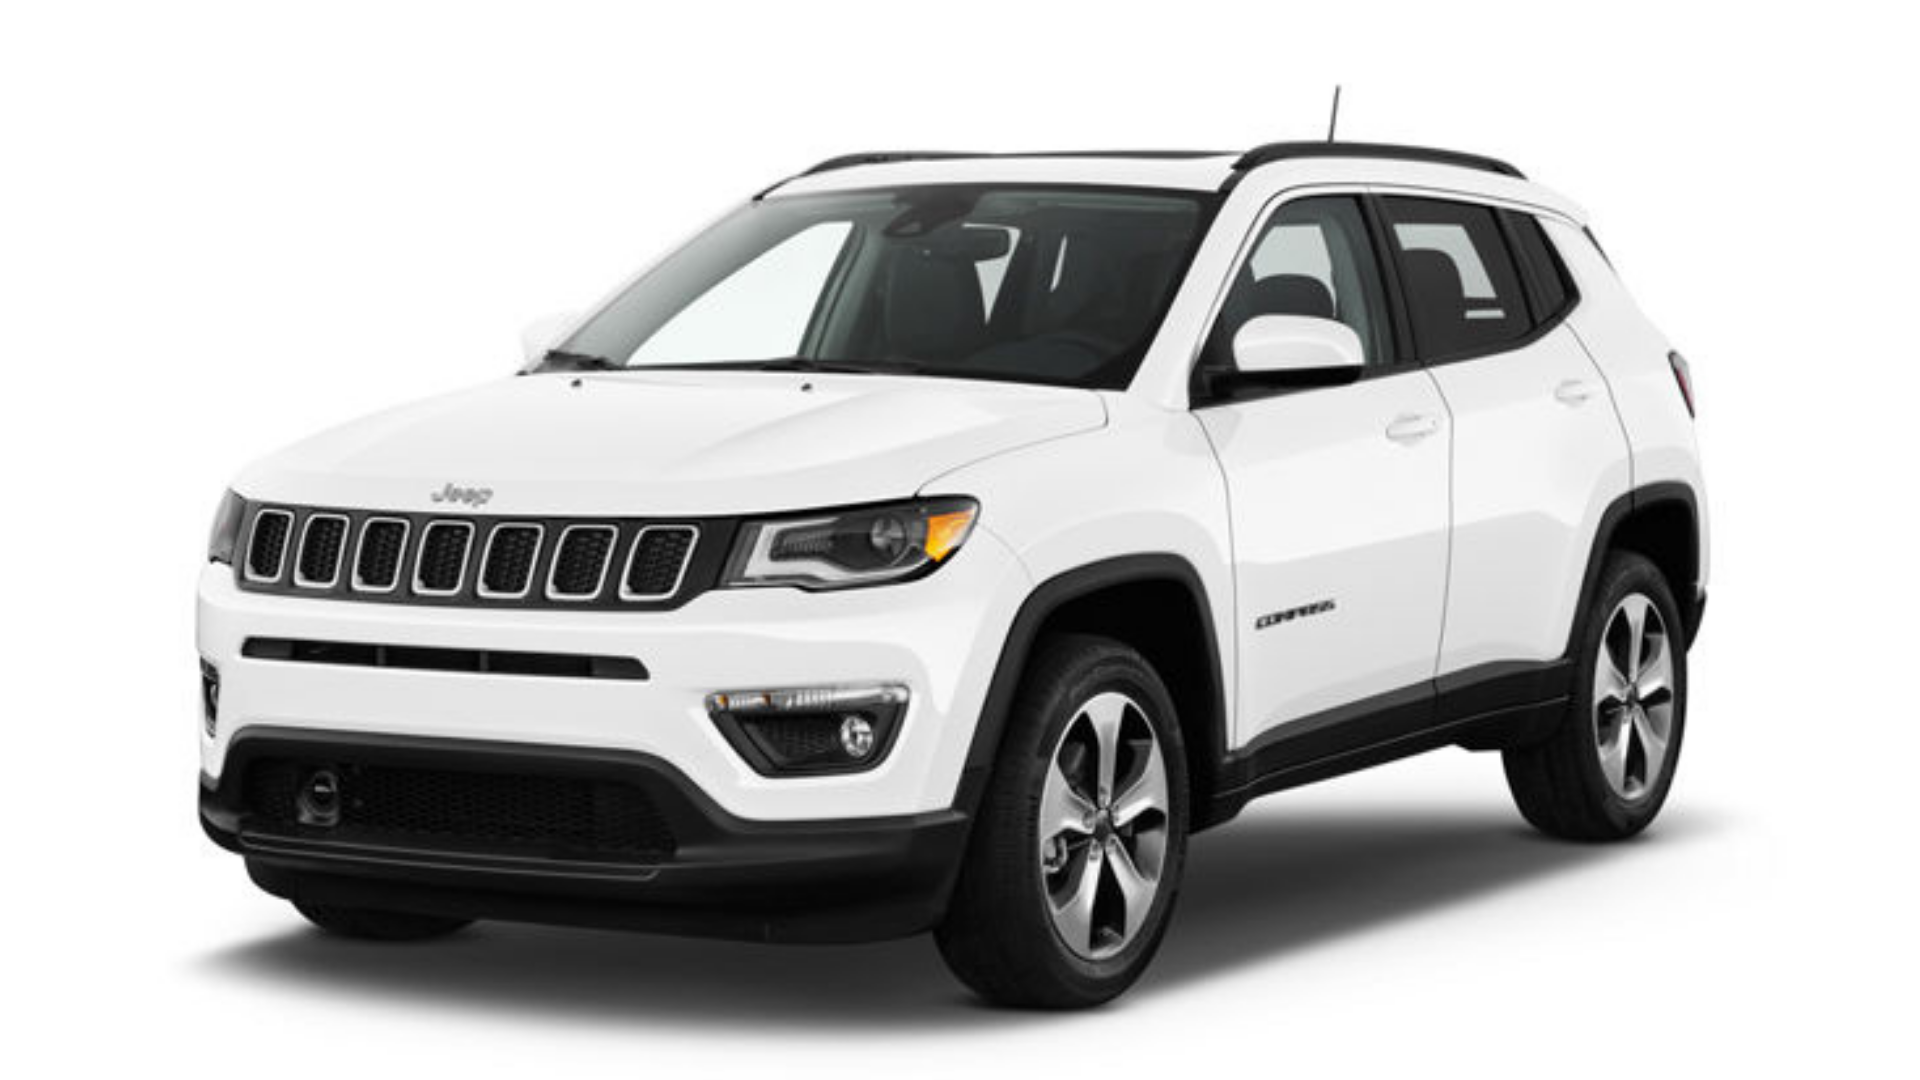 2021 Jeep Compass Price in Nepal, Design, Performance & Features